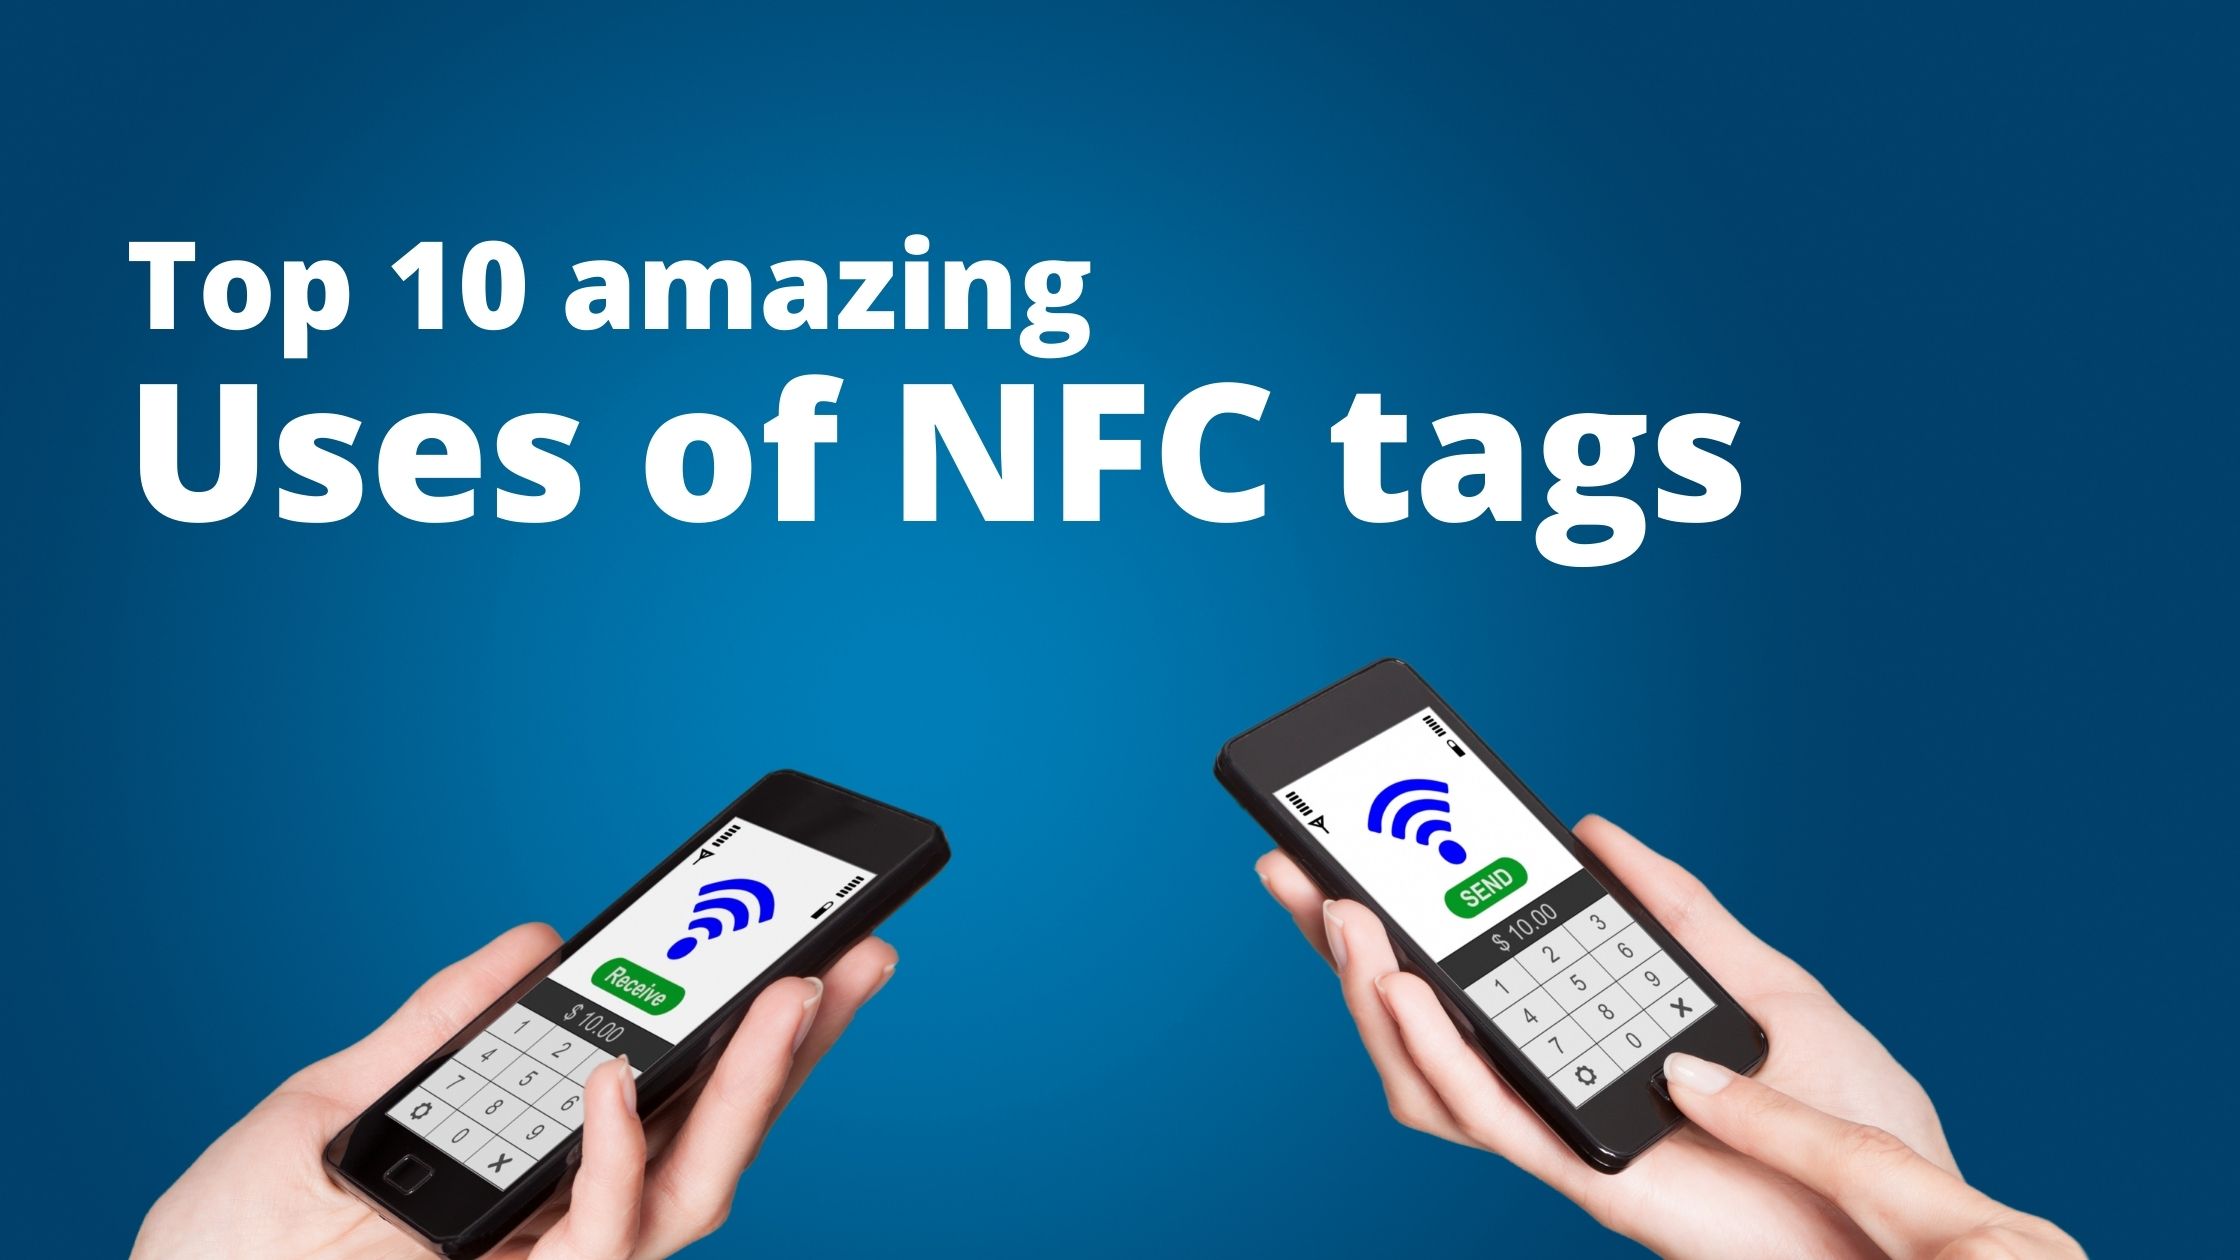 Uses of NFC tags – Top 10 amazing and other uses